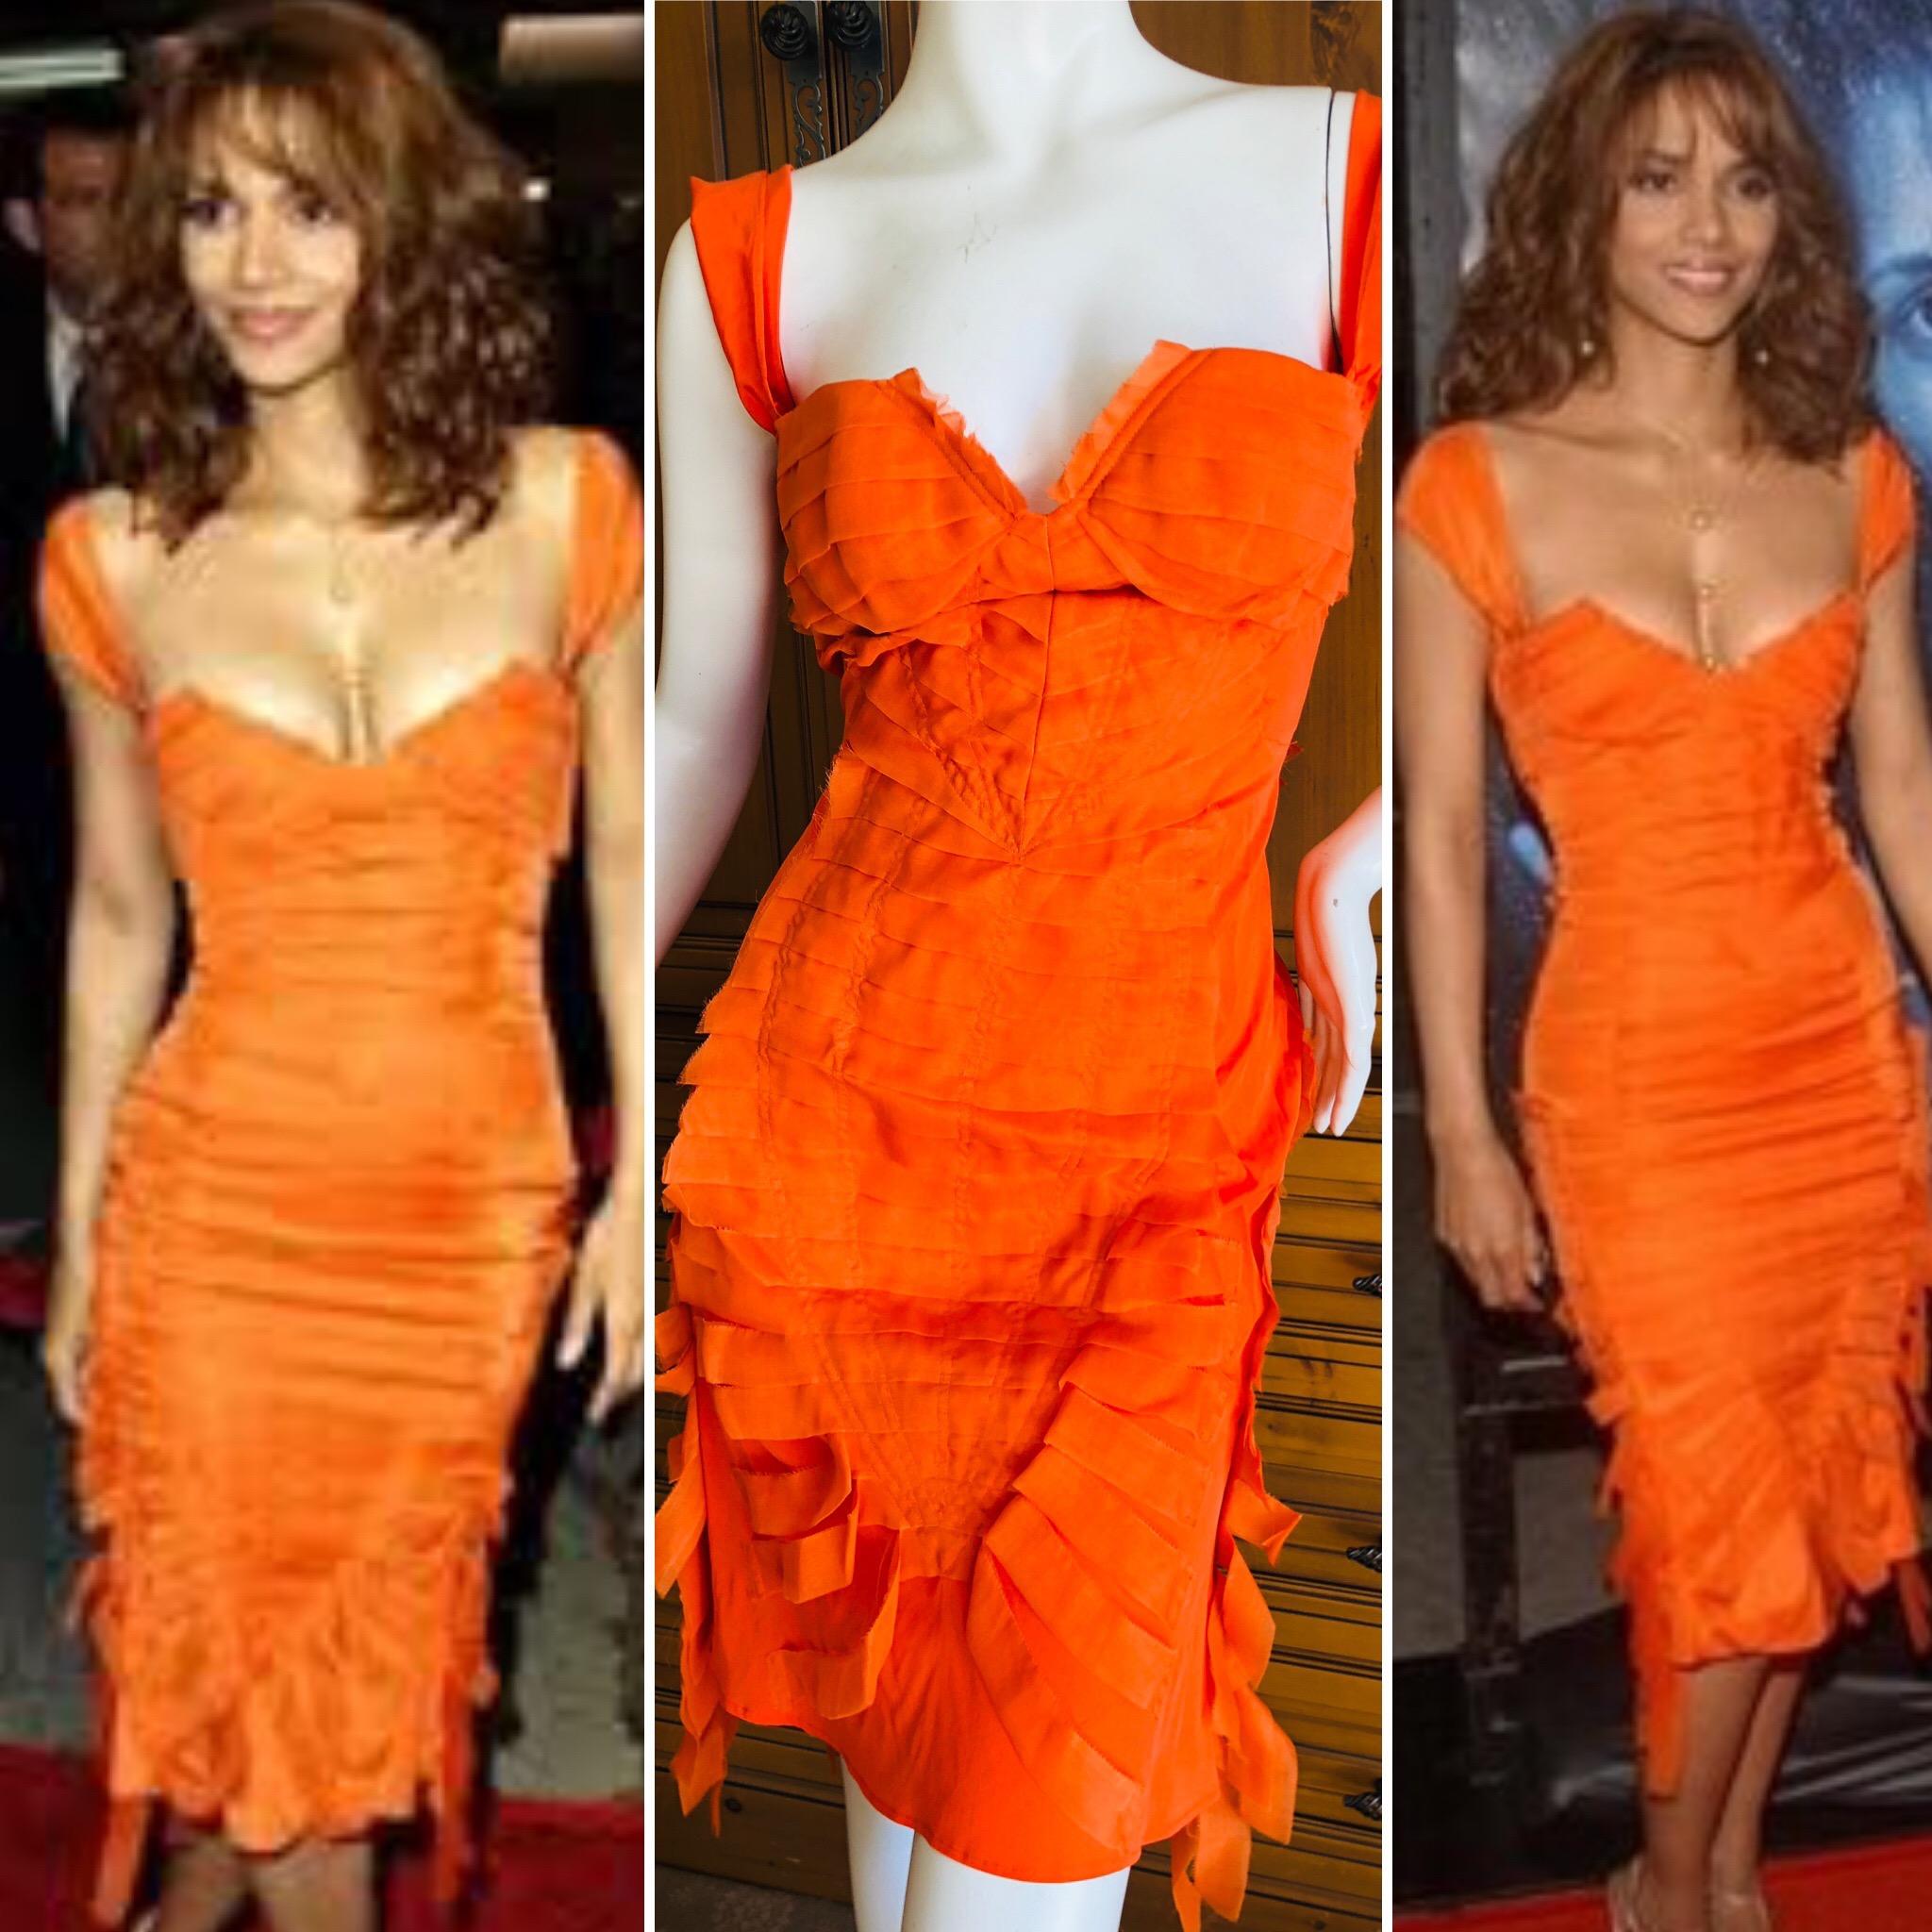 Gucci by Tom Ford  orange ribbon dress 2004 .
Appears in Tom Ford book twice, in orange/red.
This is classic Tom Ford, sexy coming and going. 
Size 38
 Bust 34